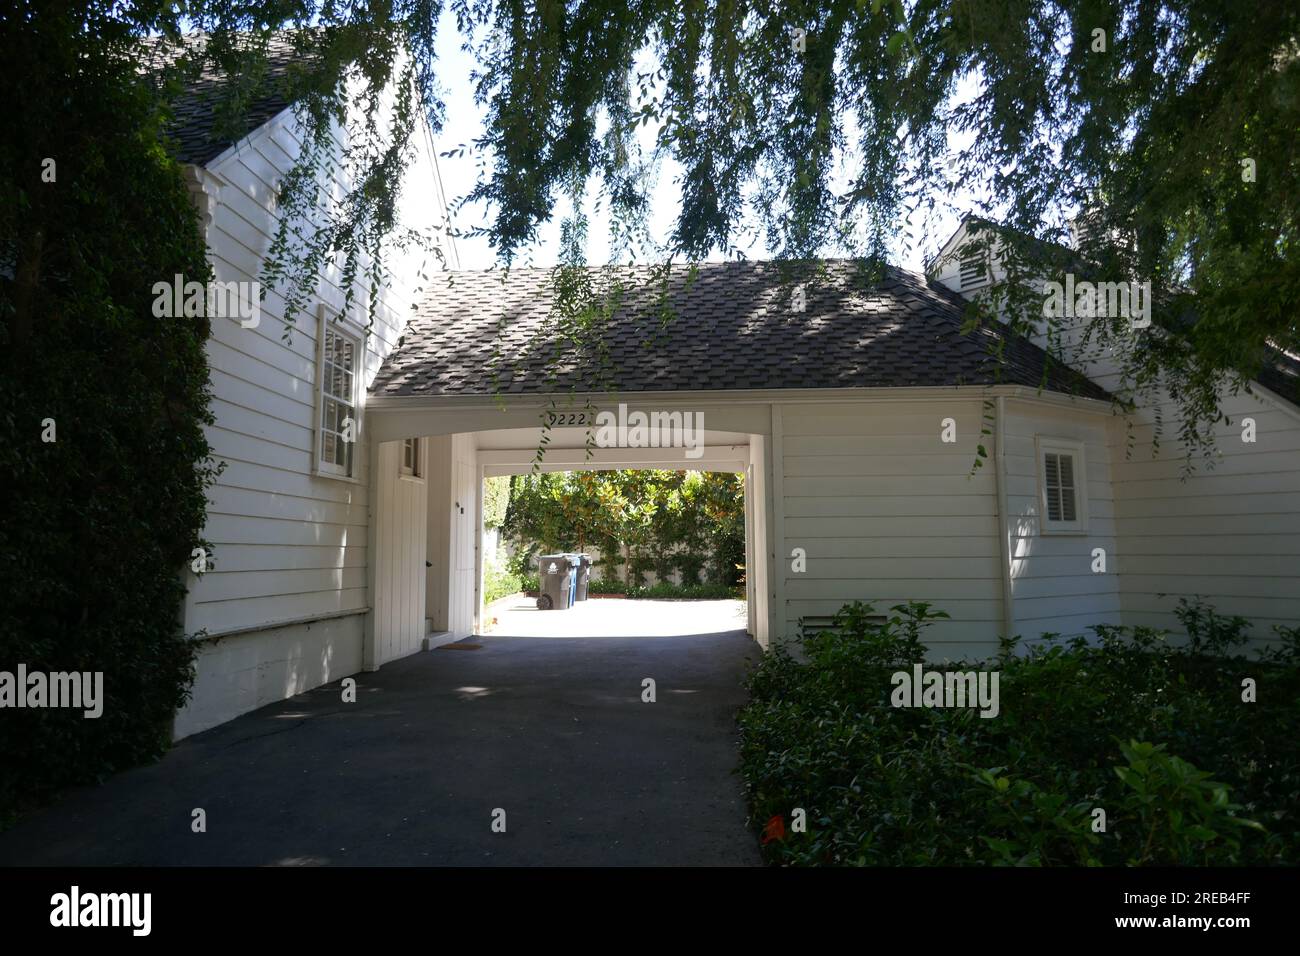 Los Angeles, California, USA 26th July 2023 Actress Marilu Jenner Former Home/house at 9222 Flicker Way in the Bird Streets on July 26, 2023 in Los Angeles, California, USA. Photo by Barry King/Alamy Stock Photo Stock Photo